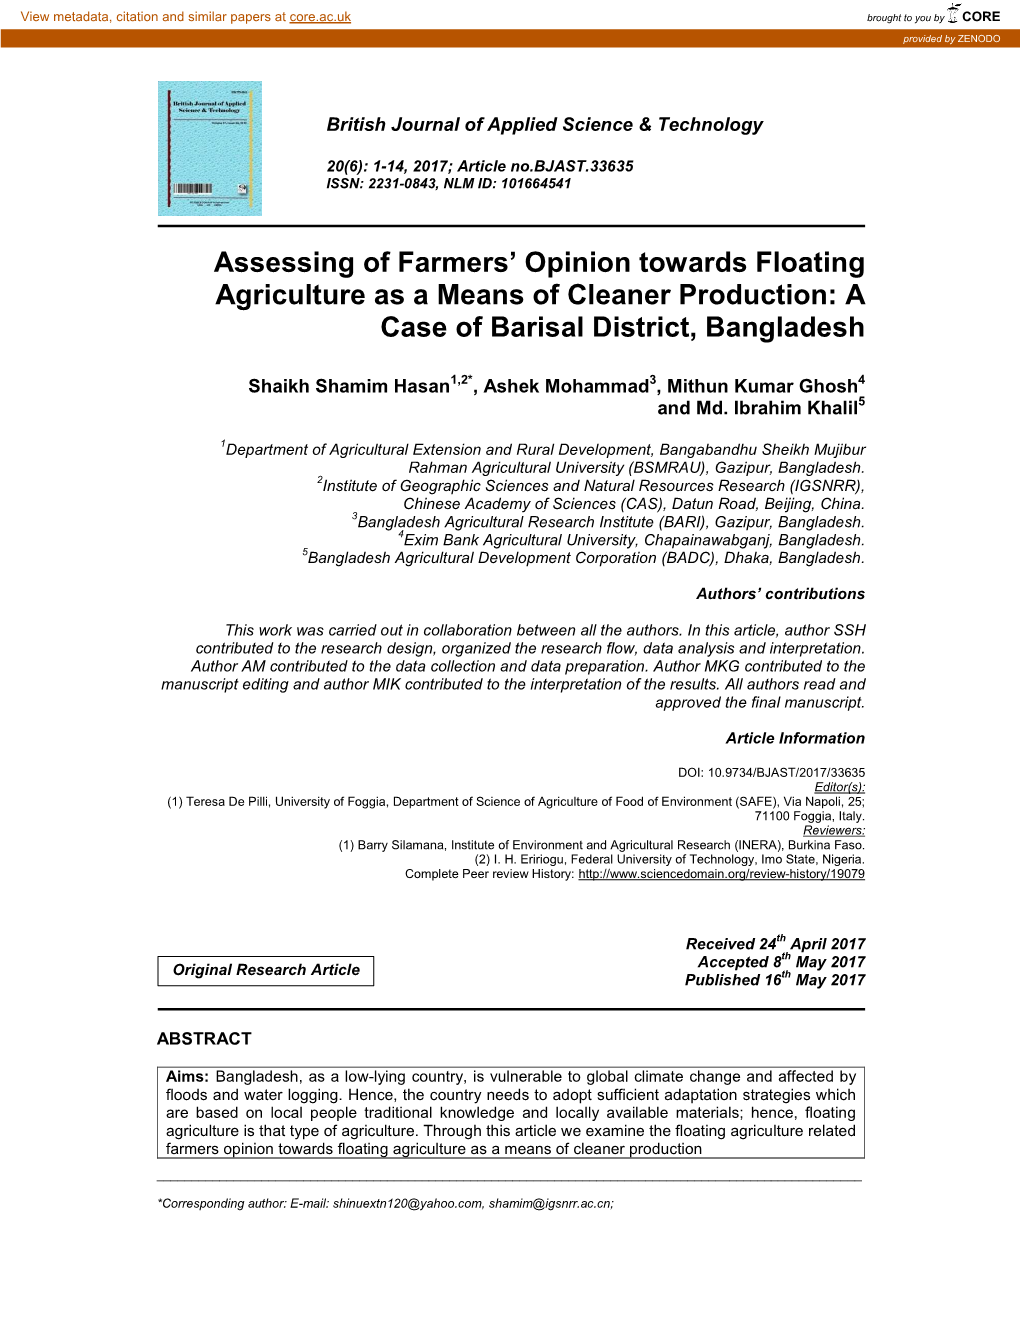 Assessing of Farmers' Opinion Towards Floating Agriculture As a Means of Cleaner Production